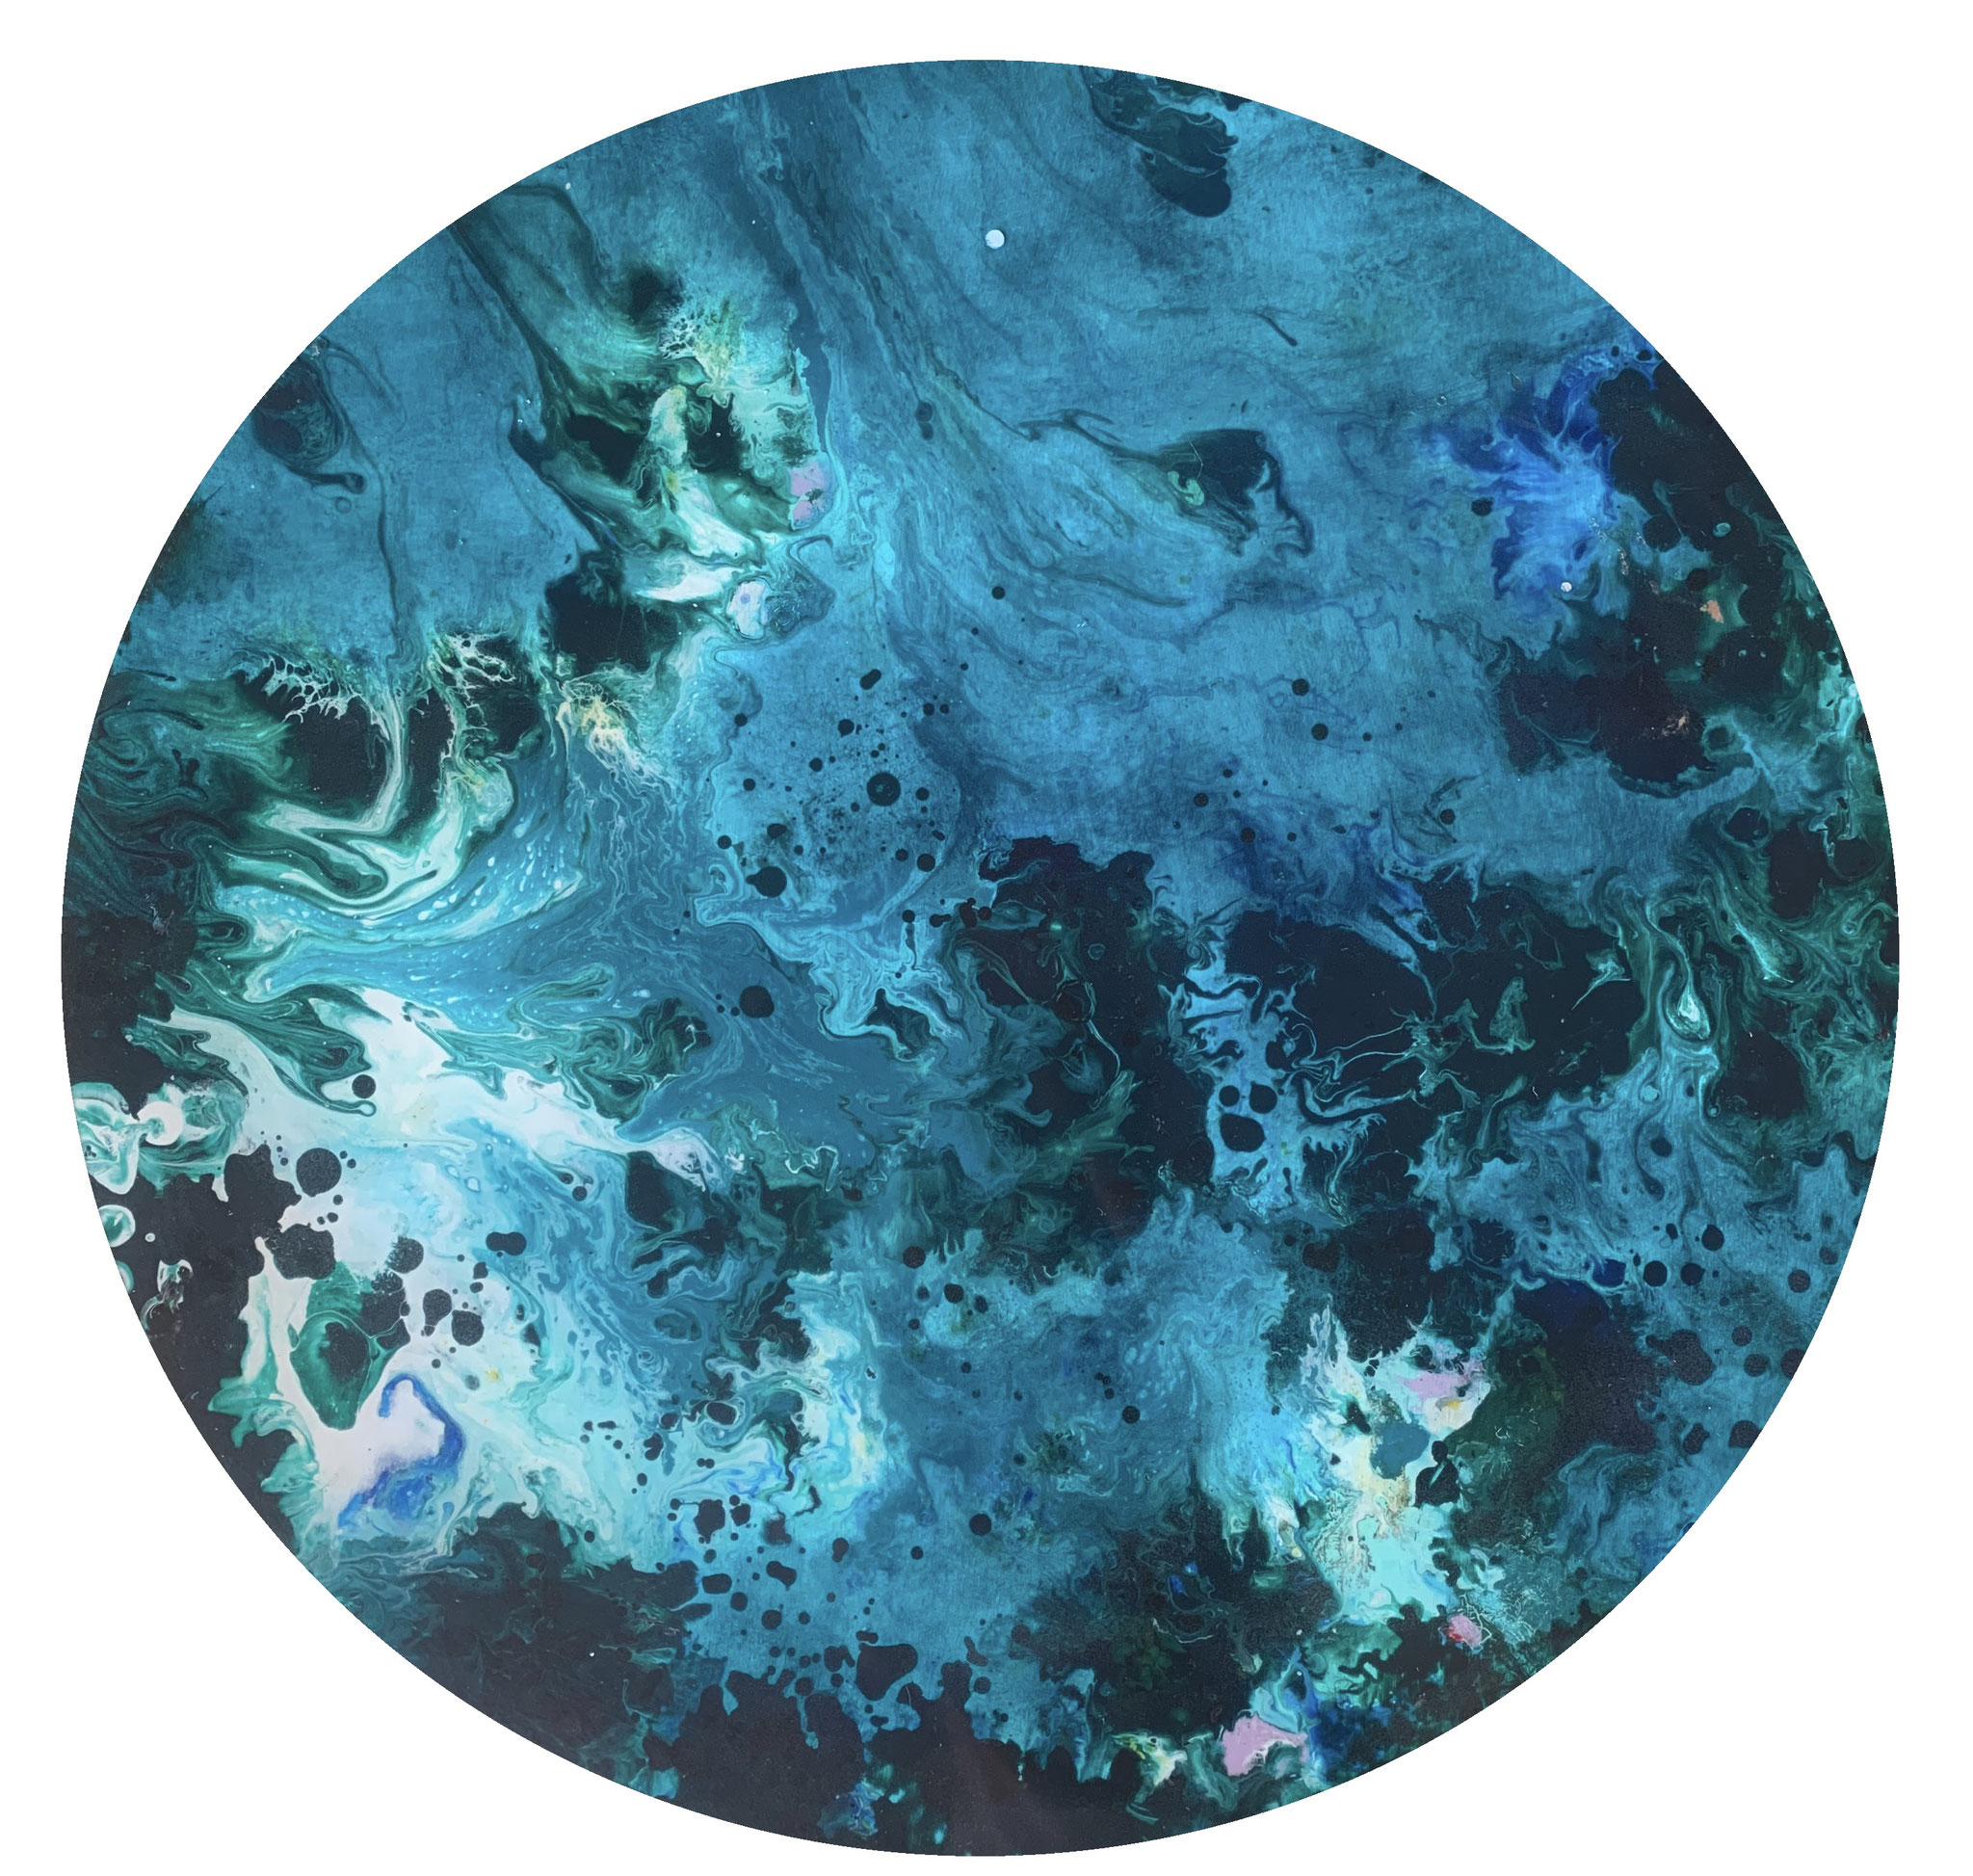 Planet I, 2022, mixed media on wood and resin, diam. 65 cm